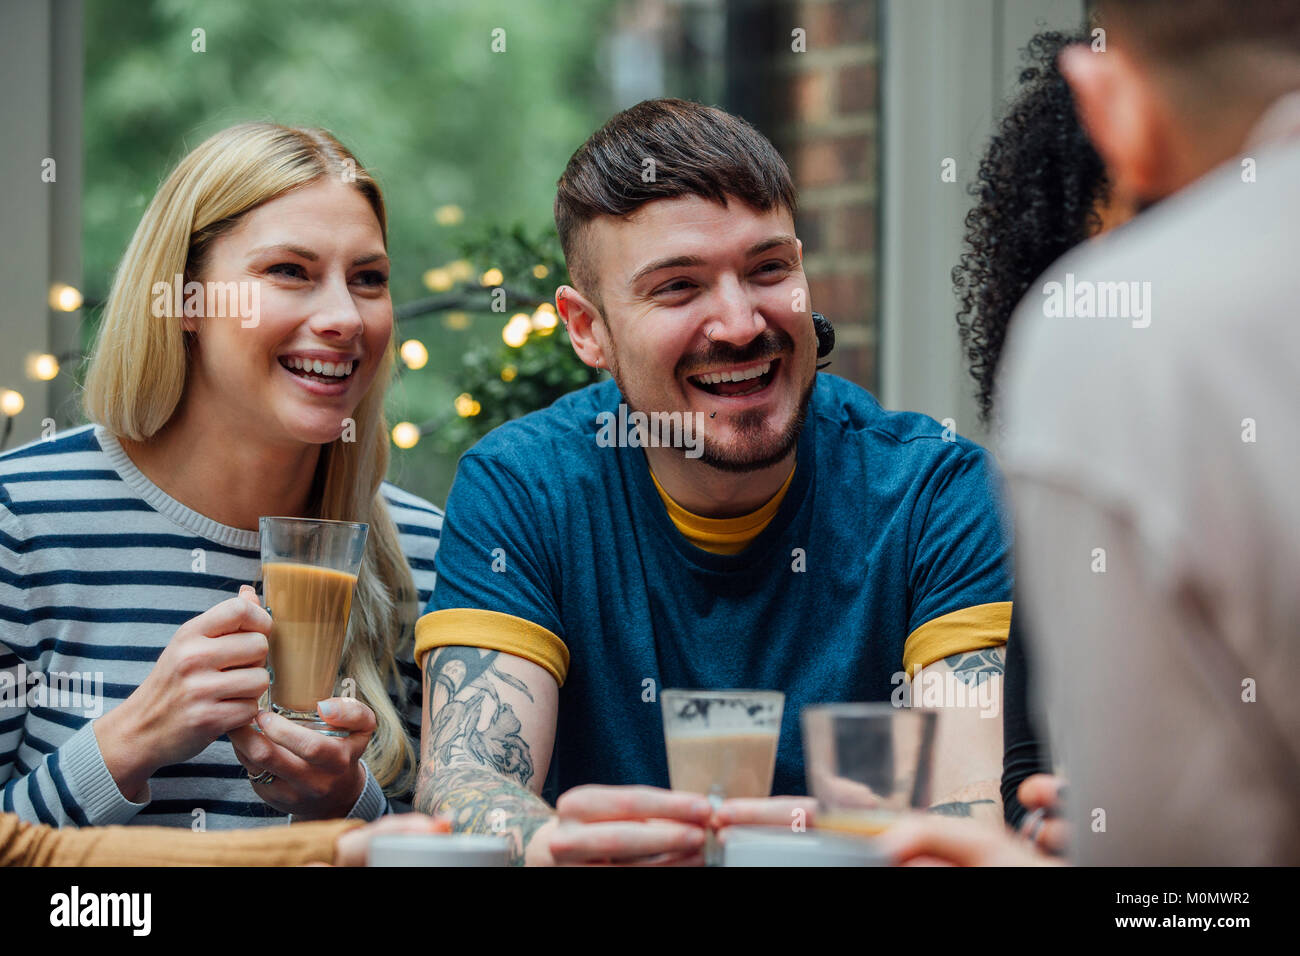 Group of friends are sitting together in a cafe, enjoying coffee and socialising. Stock Photo